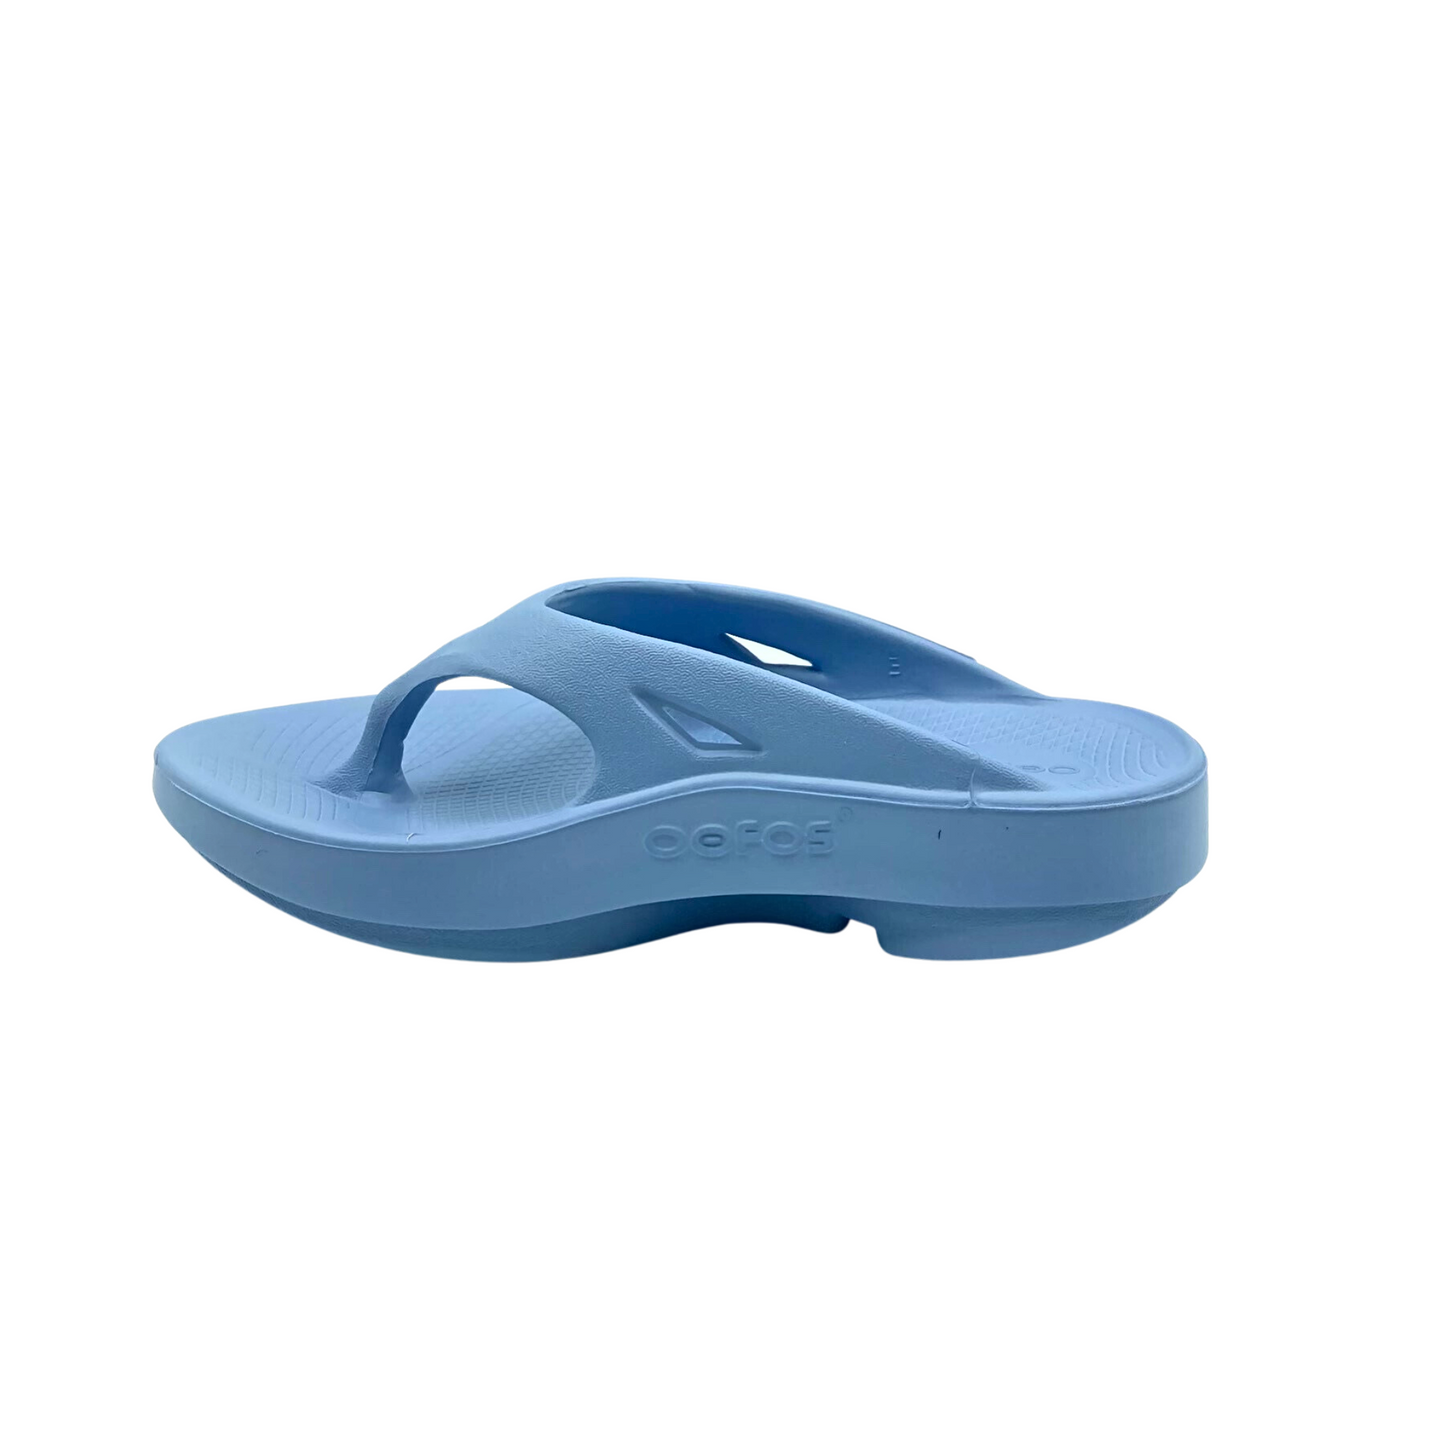 Inside view of foam sandal with toe post.  Anatomical footbed with fantastic arch support and heel cradle